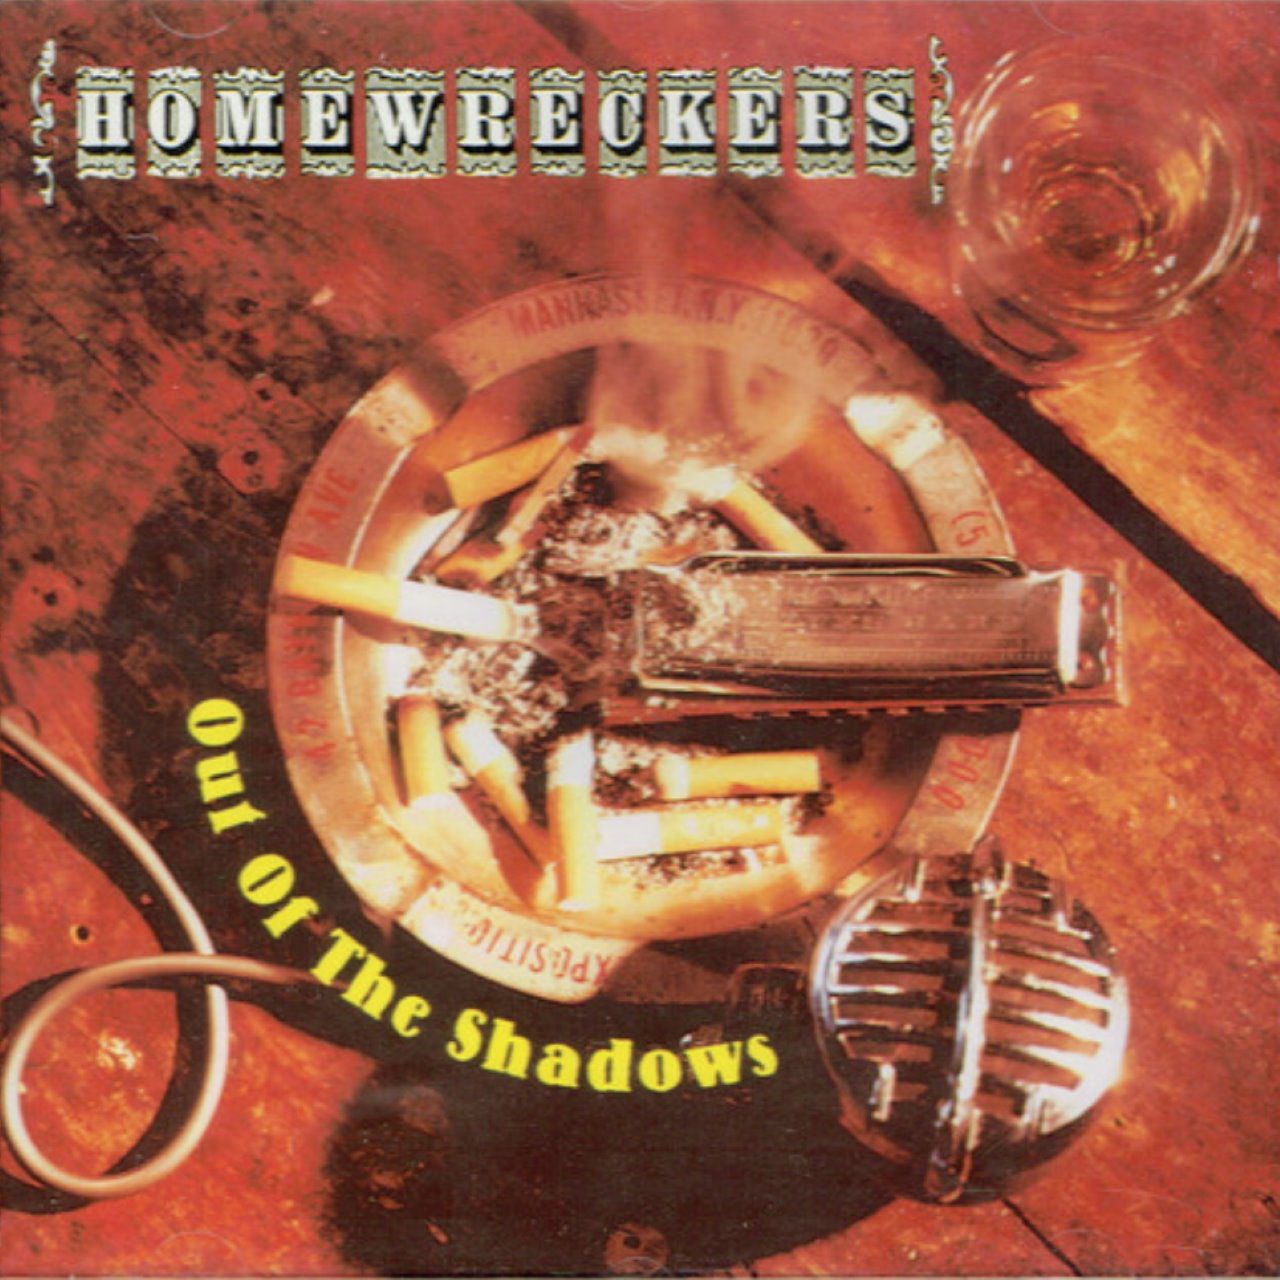 Homewreckers – Out Of Shadows cover album